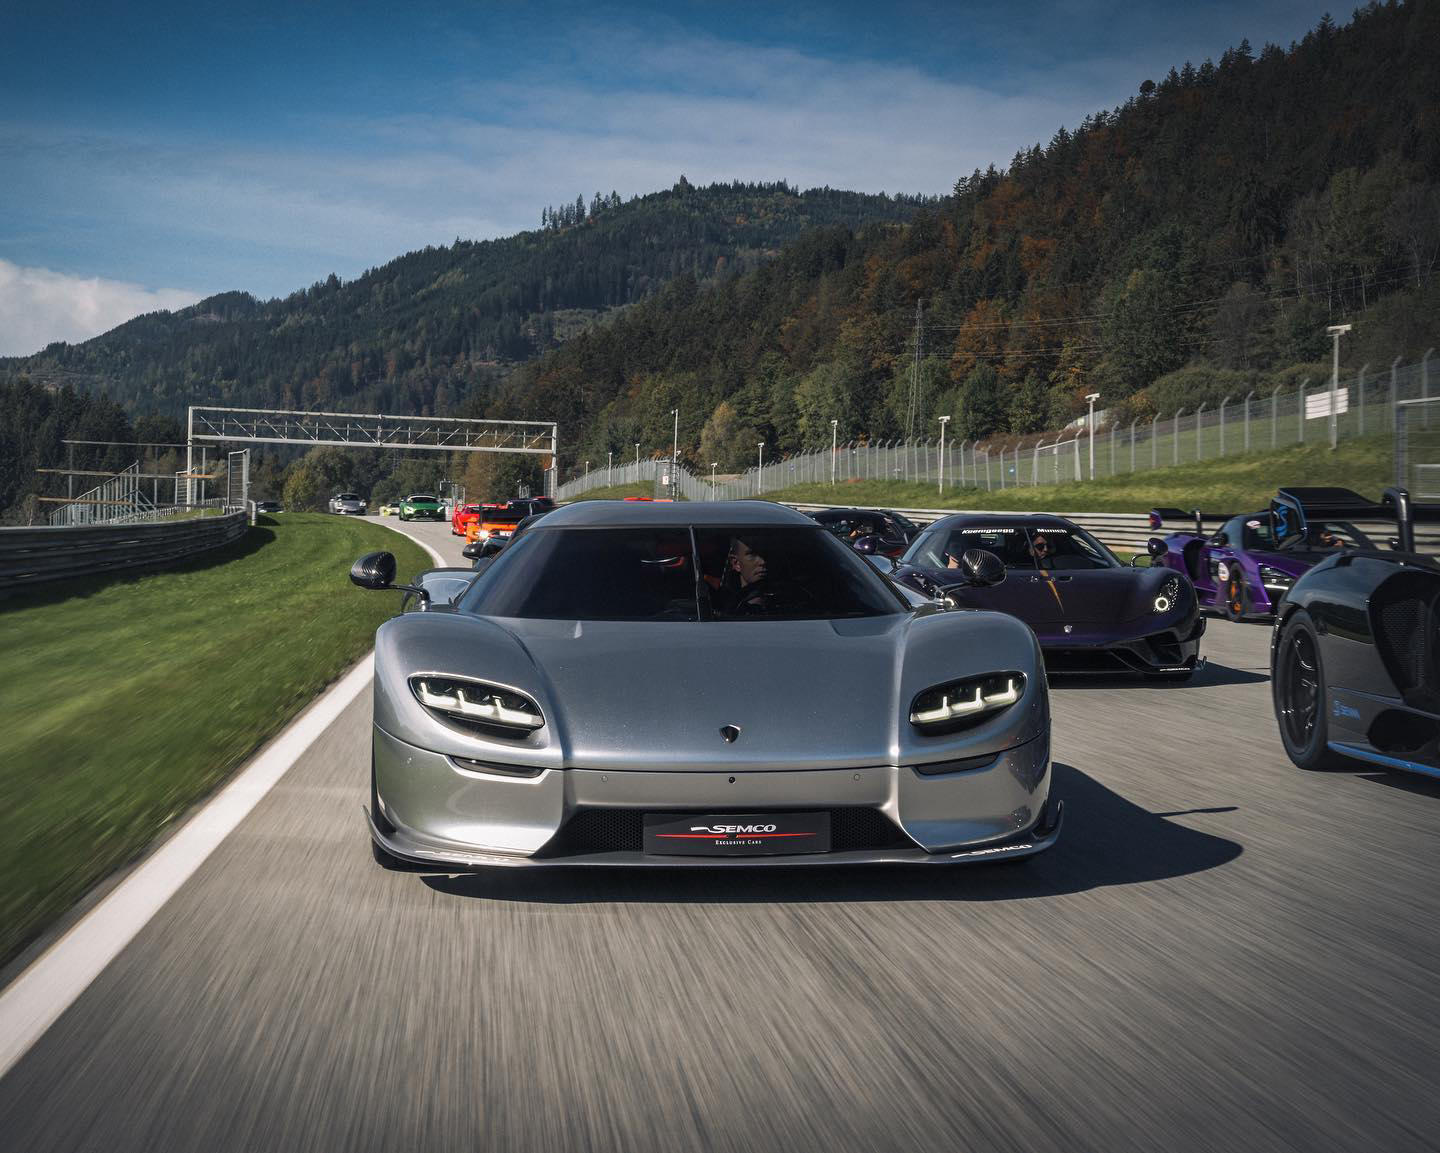 Koenigsegg - The CC850 making a debut at Redbull Ring, together with the Regera and Agera One of 1